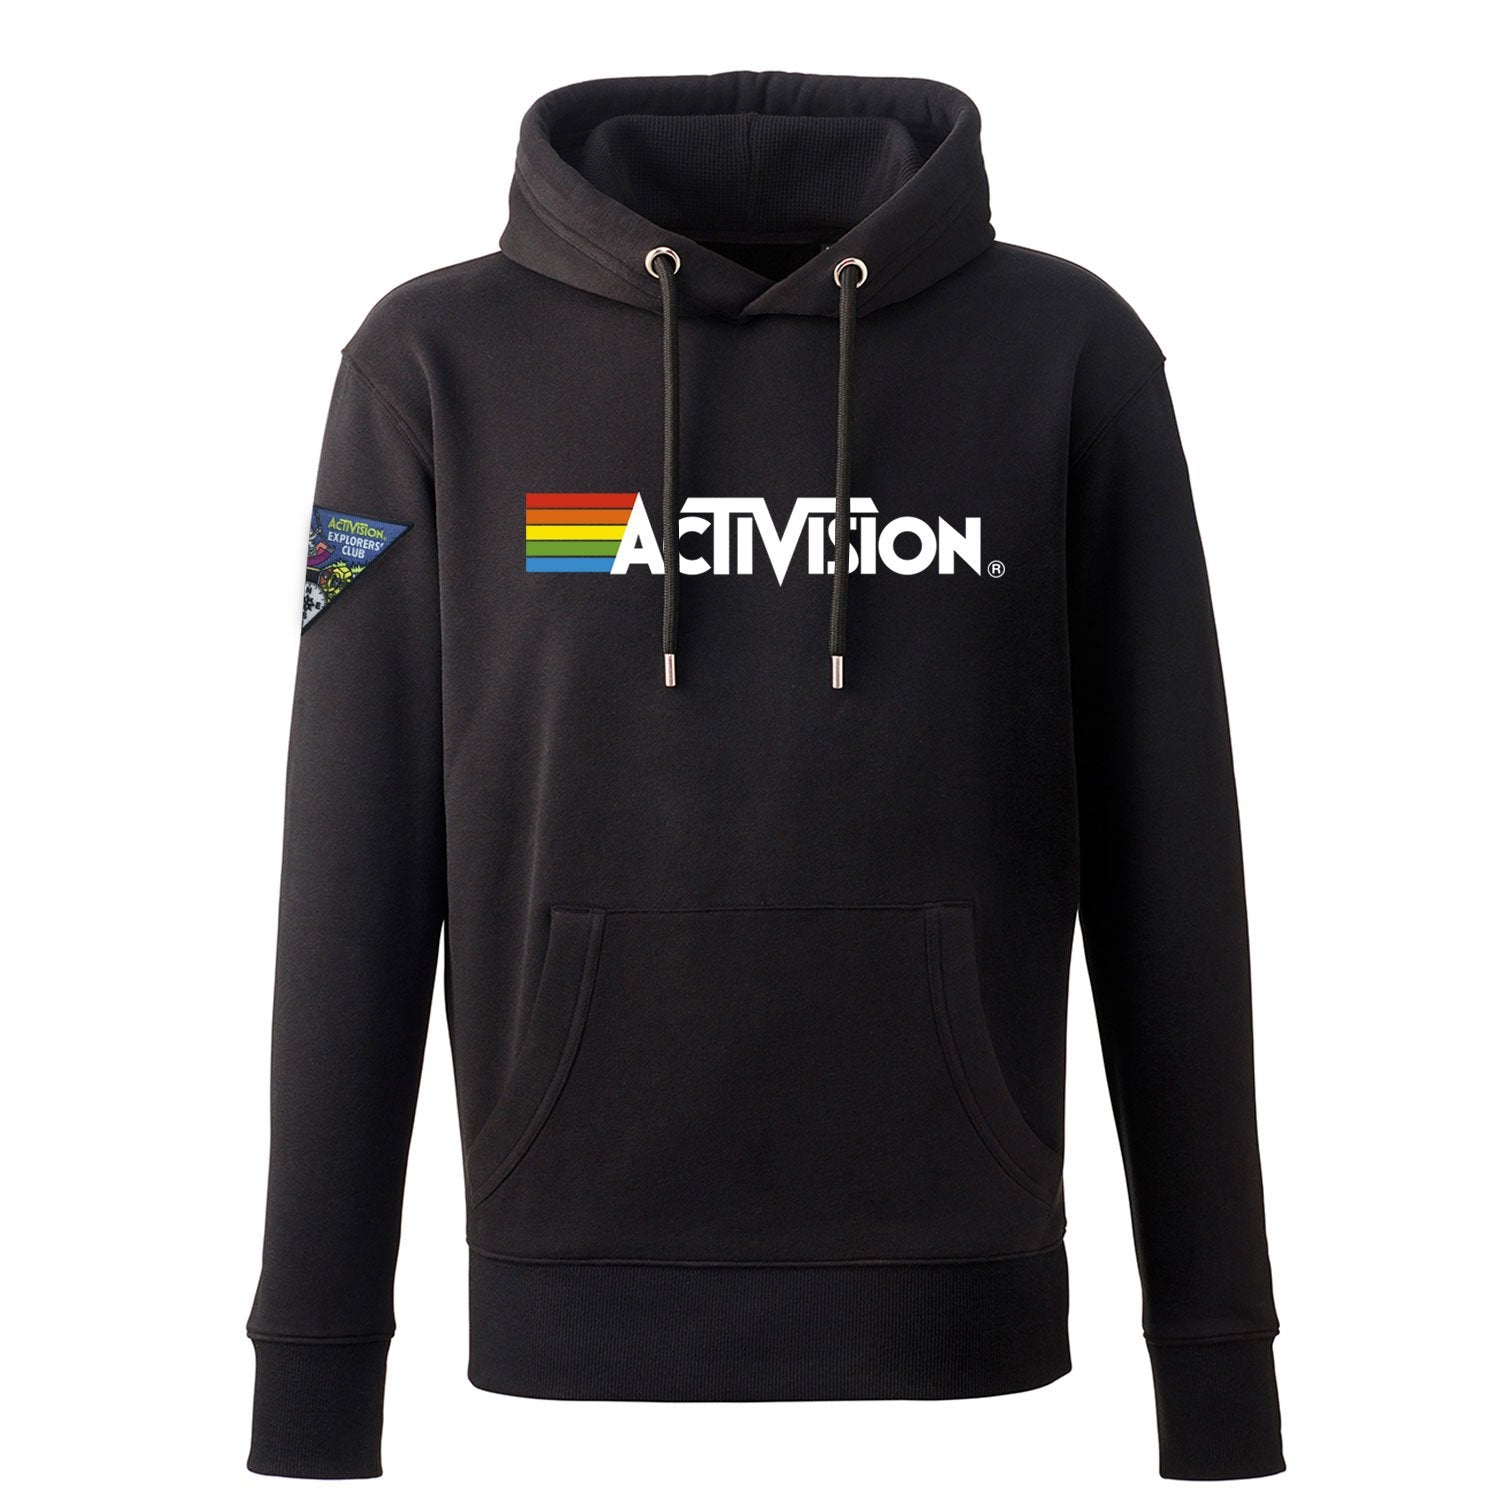 Pitfall! Explorer's Club Patch, Activision Logo Men's Hoody, Black Pullover in Unisex Fit with Kangaroo Pocket